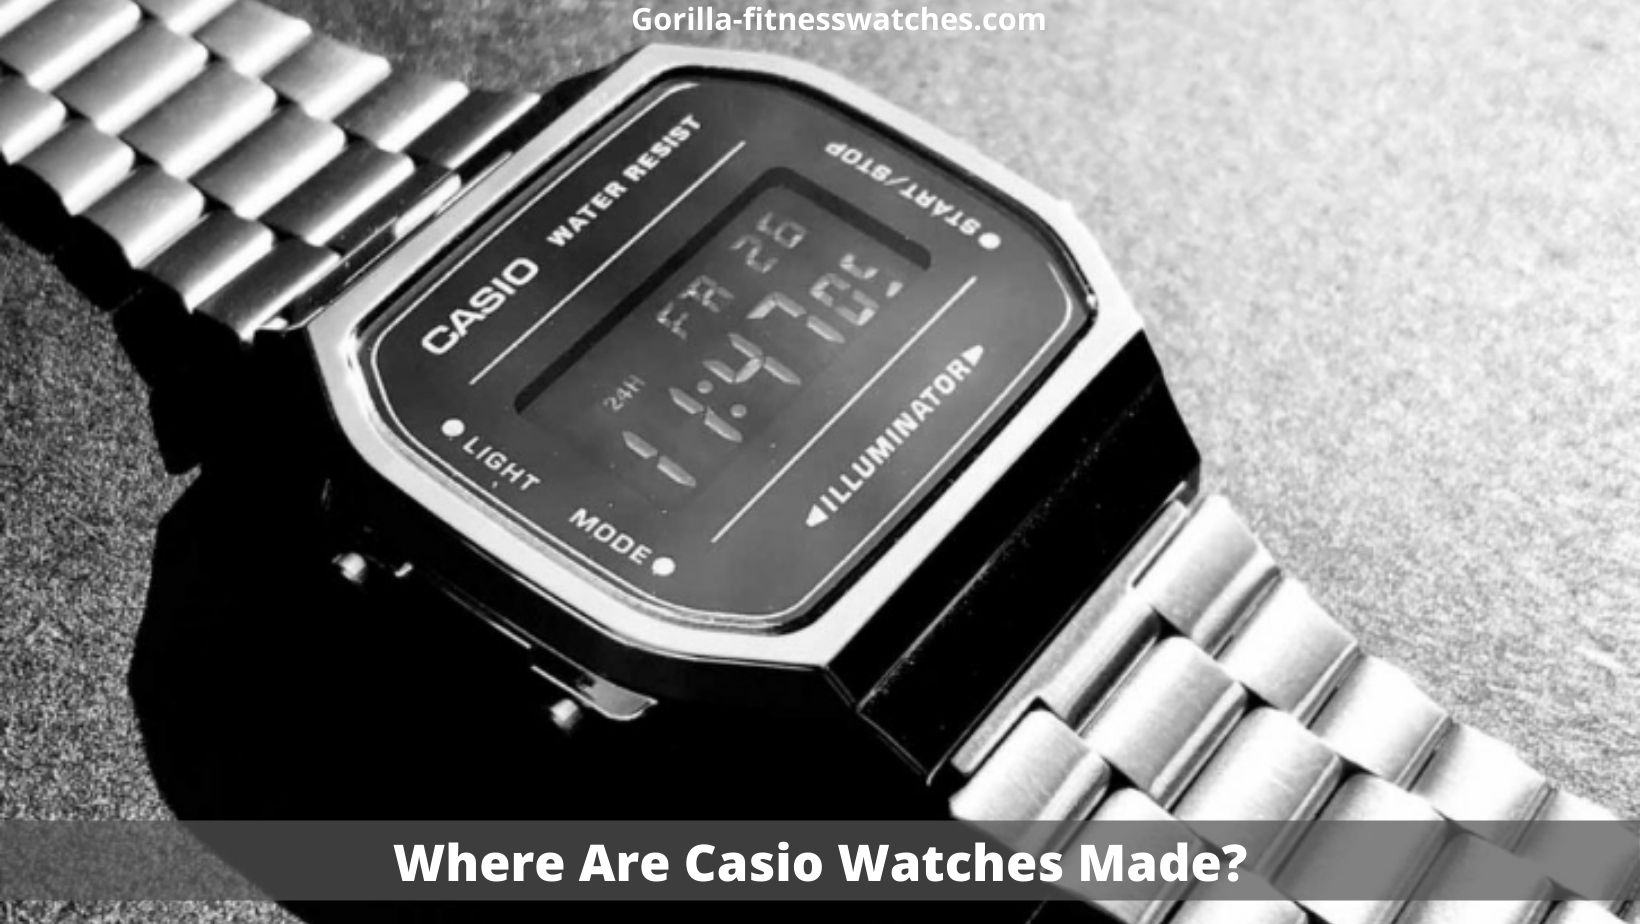 Where Are Casio Watches Made?